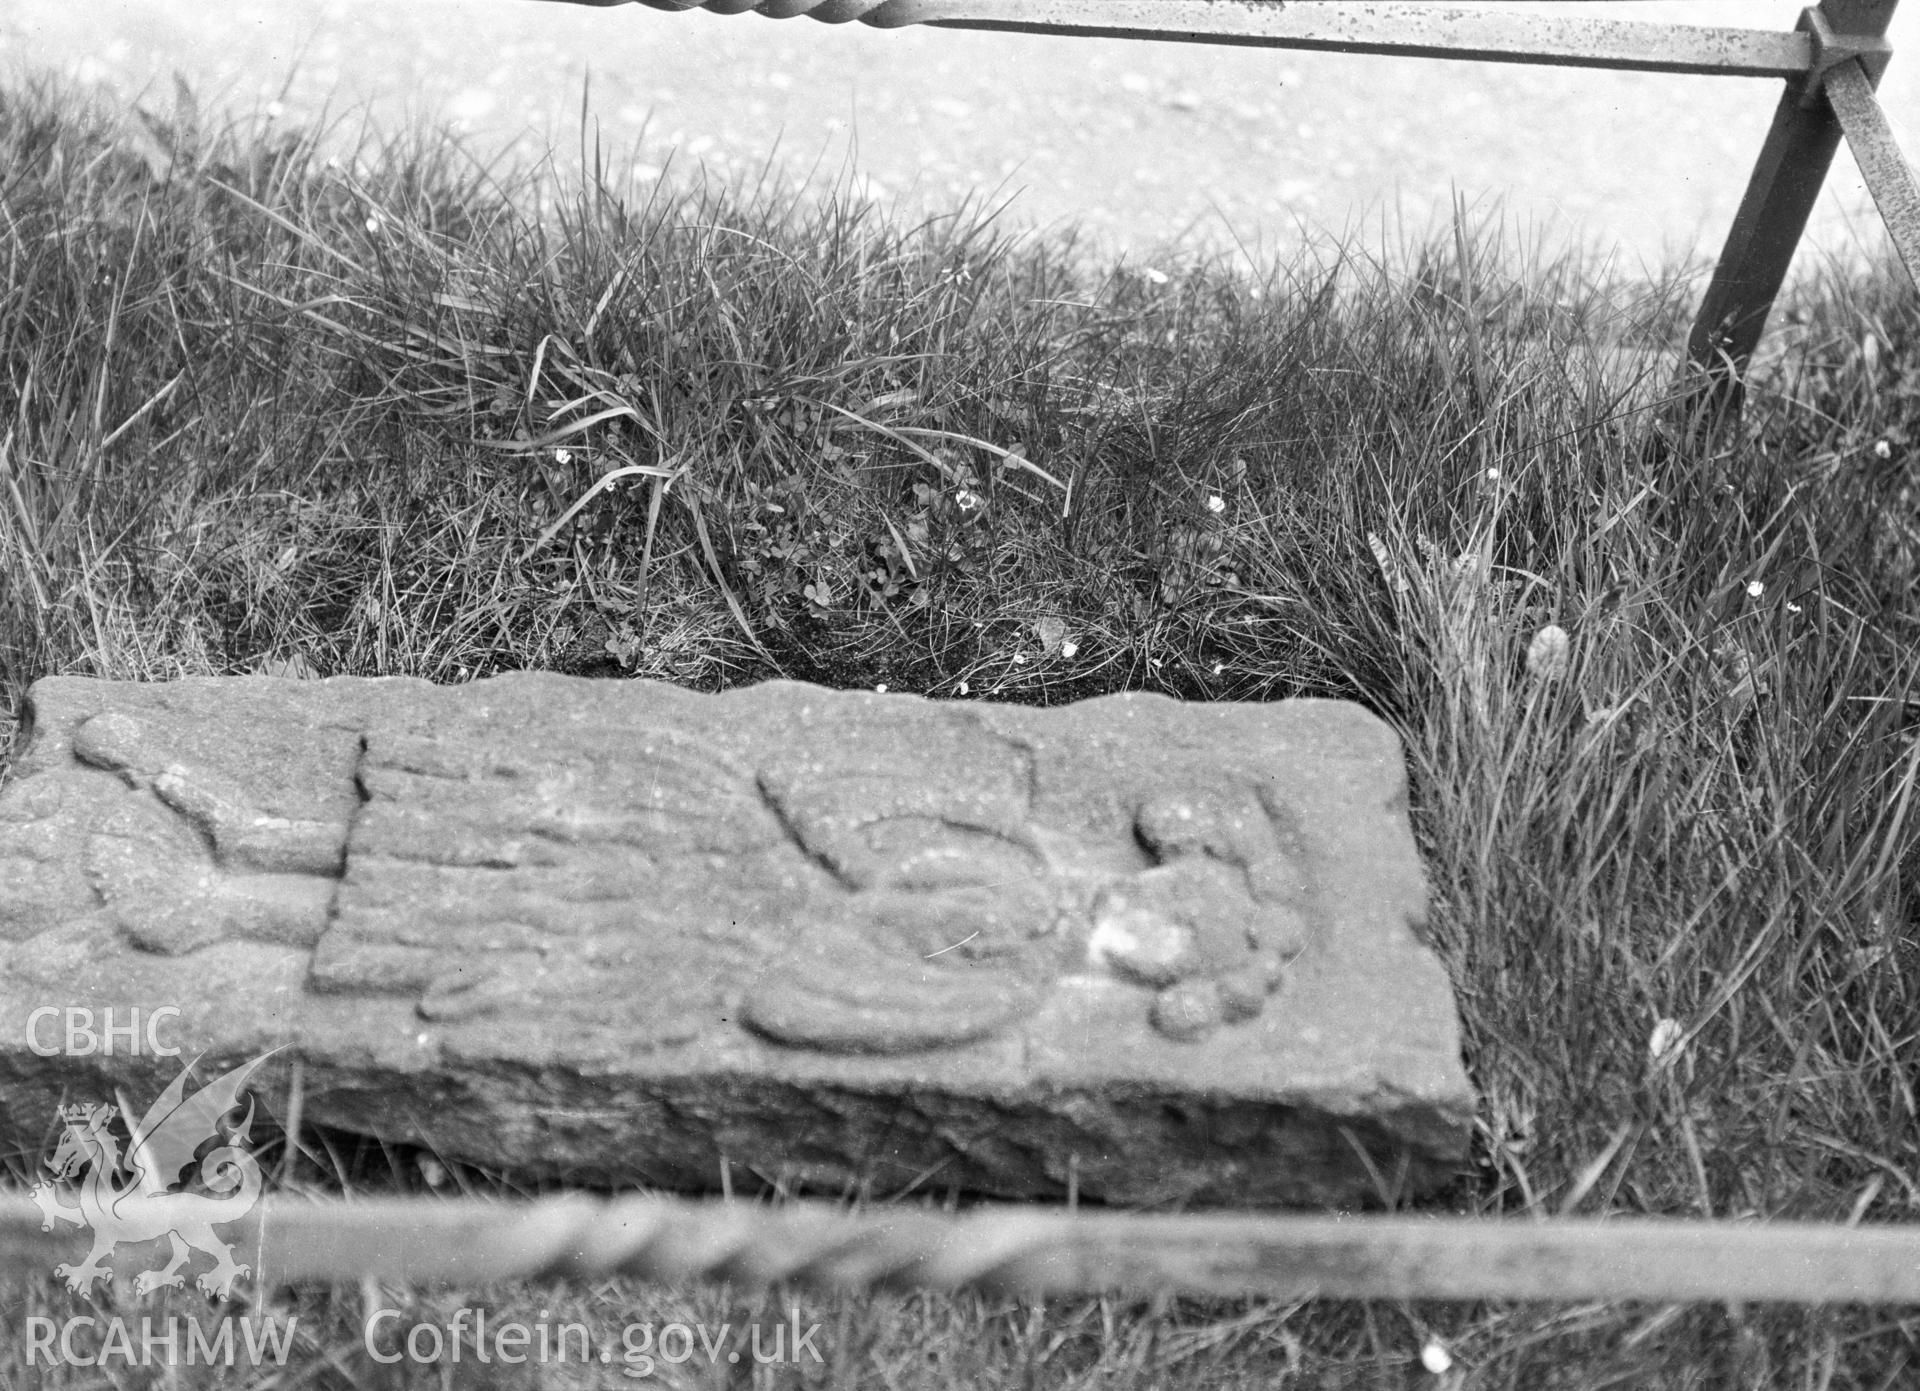 Digital copy of a nitrate negative showing Chirk churchyard stone.